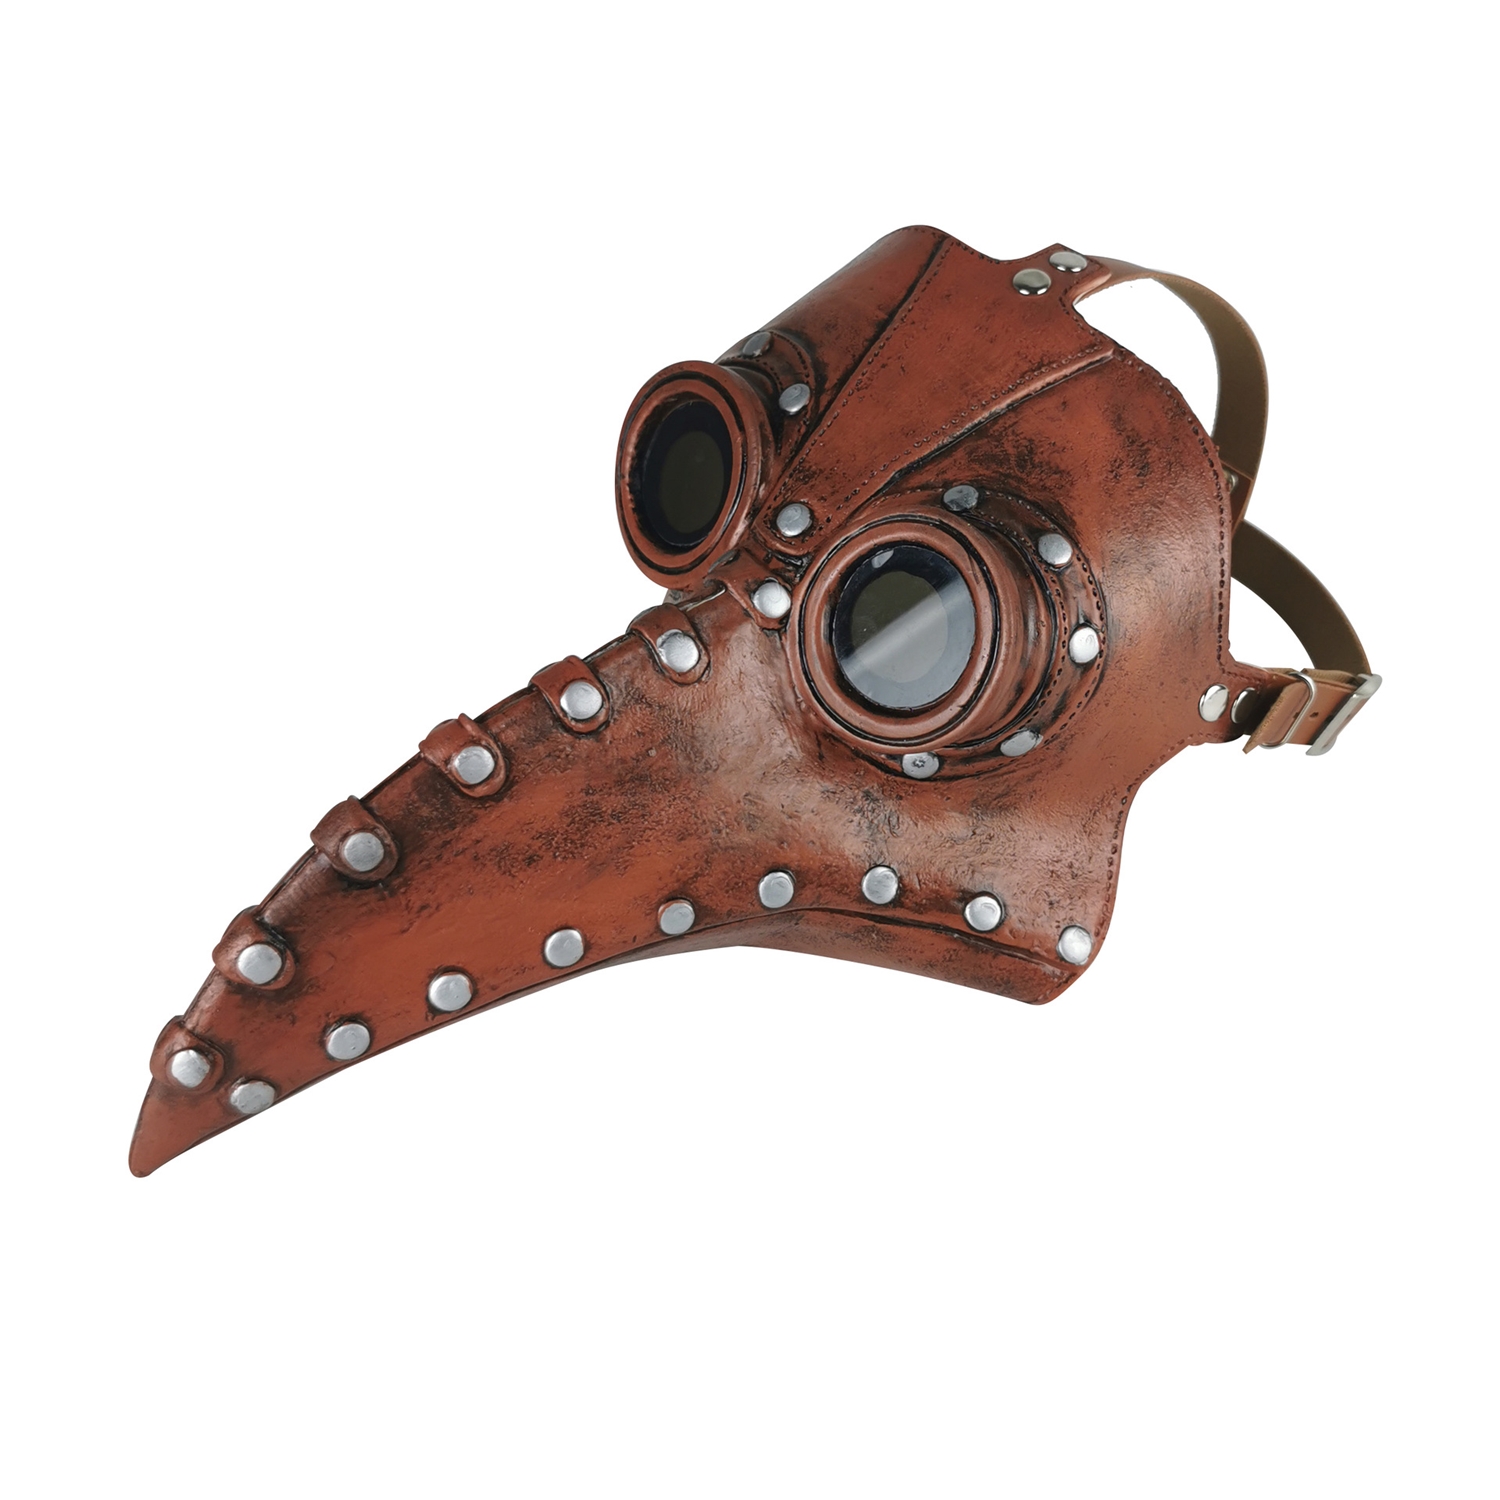 Funny Medieval Steampunk Plague Doctor Bird Mask Latex Punk Cosplay Masks Beak Adult Halloween Event Cosplay Props Party